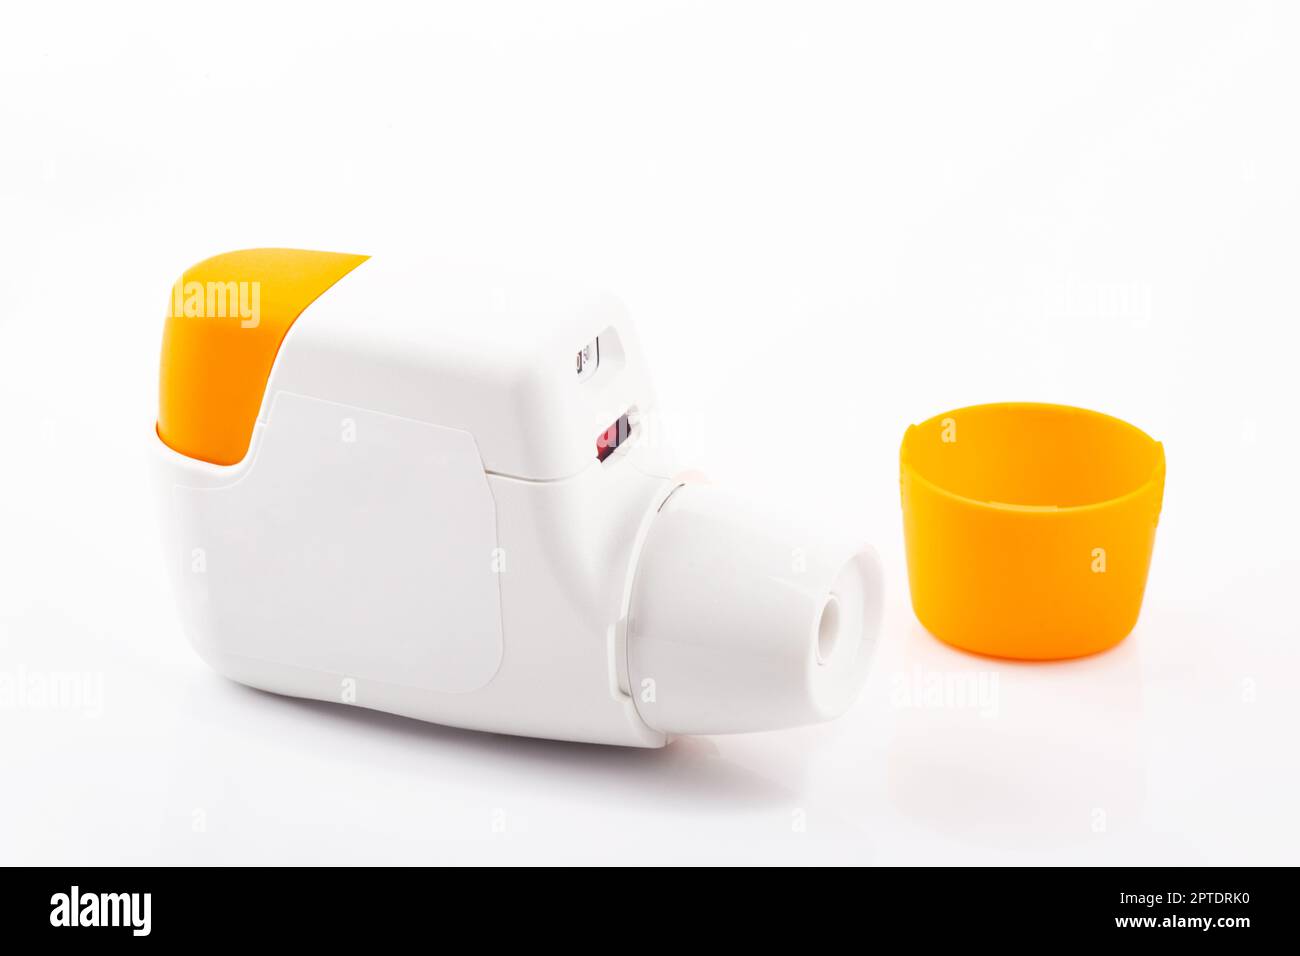 Metered Dose Inhaler isolated over white background Stock Photo